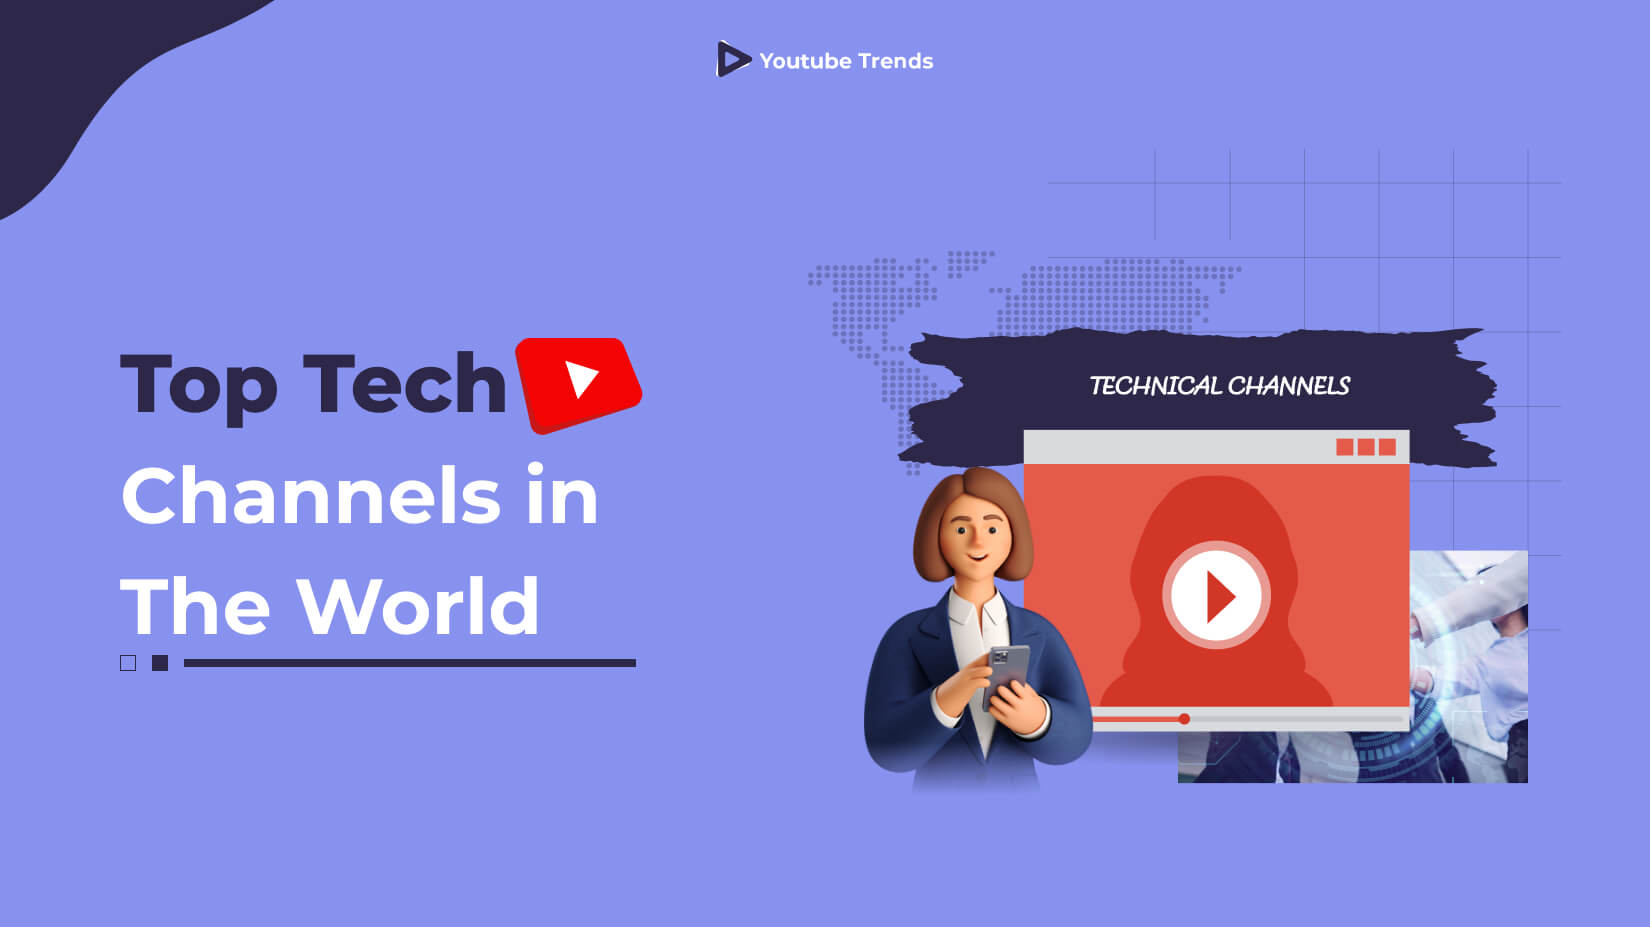 Top Tech YouTube Channels in The World